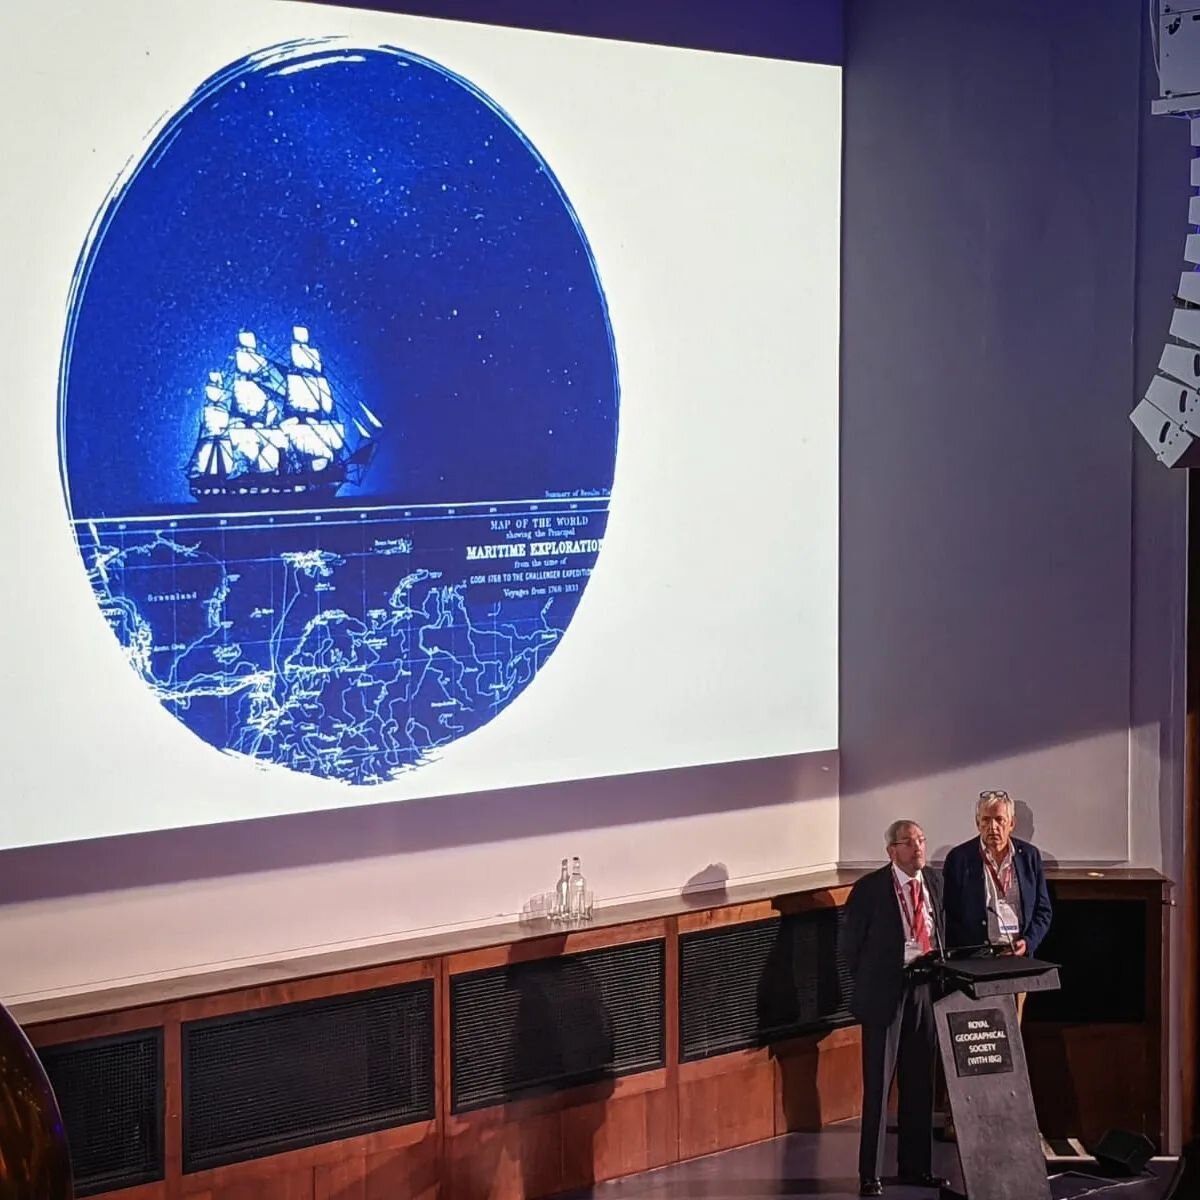 We're incredibly excited to be here at the Challenger 150 conference at the Natural History Museum in London.

Alongside countless pioneering marine researchers, our very own Dr. Thomas Linley and Prof. Alan Jamieson will be giving presentations.

Ke